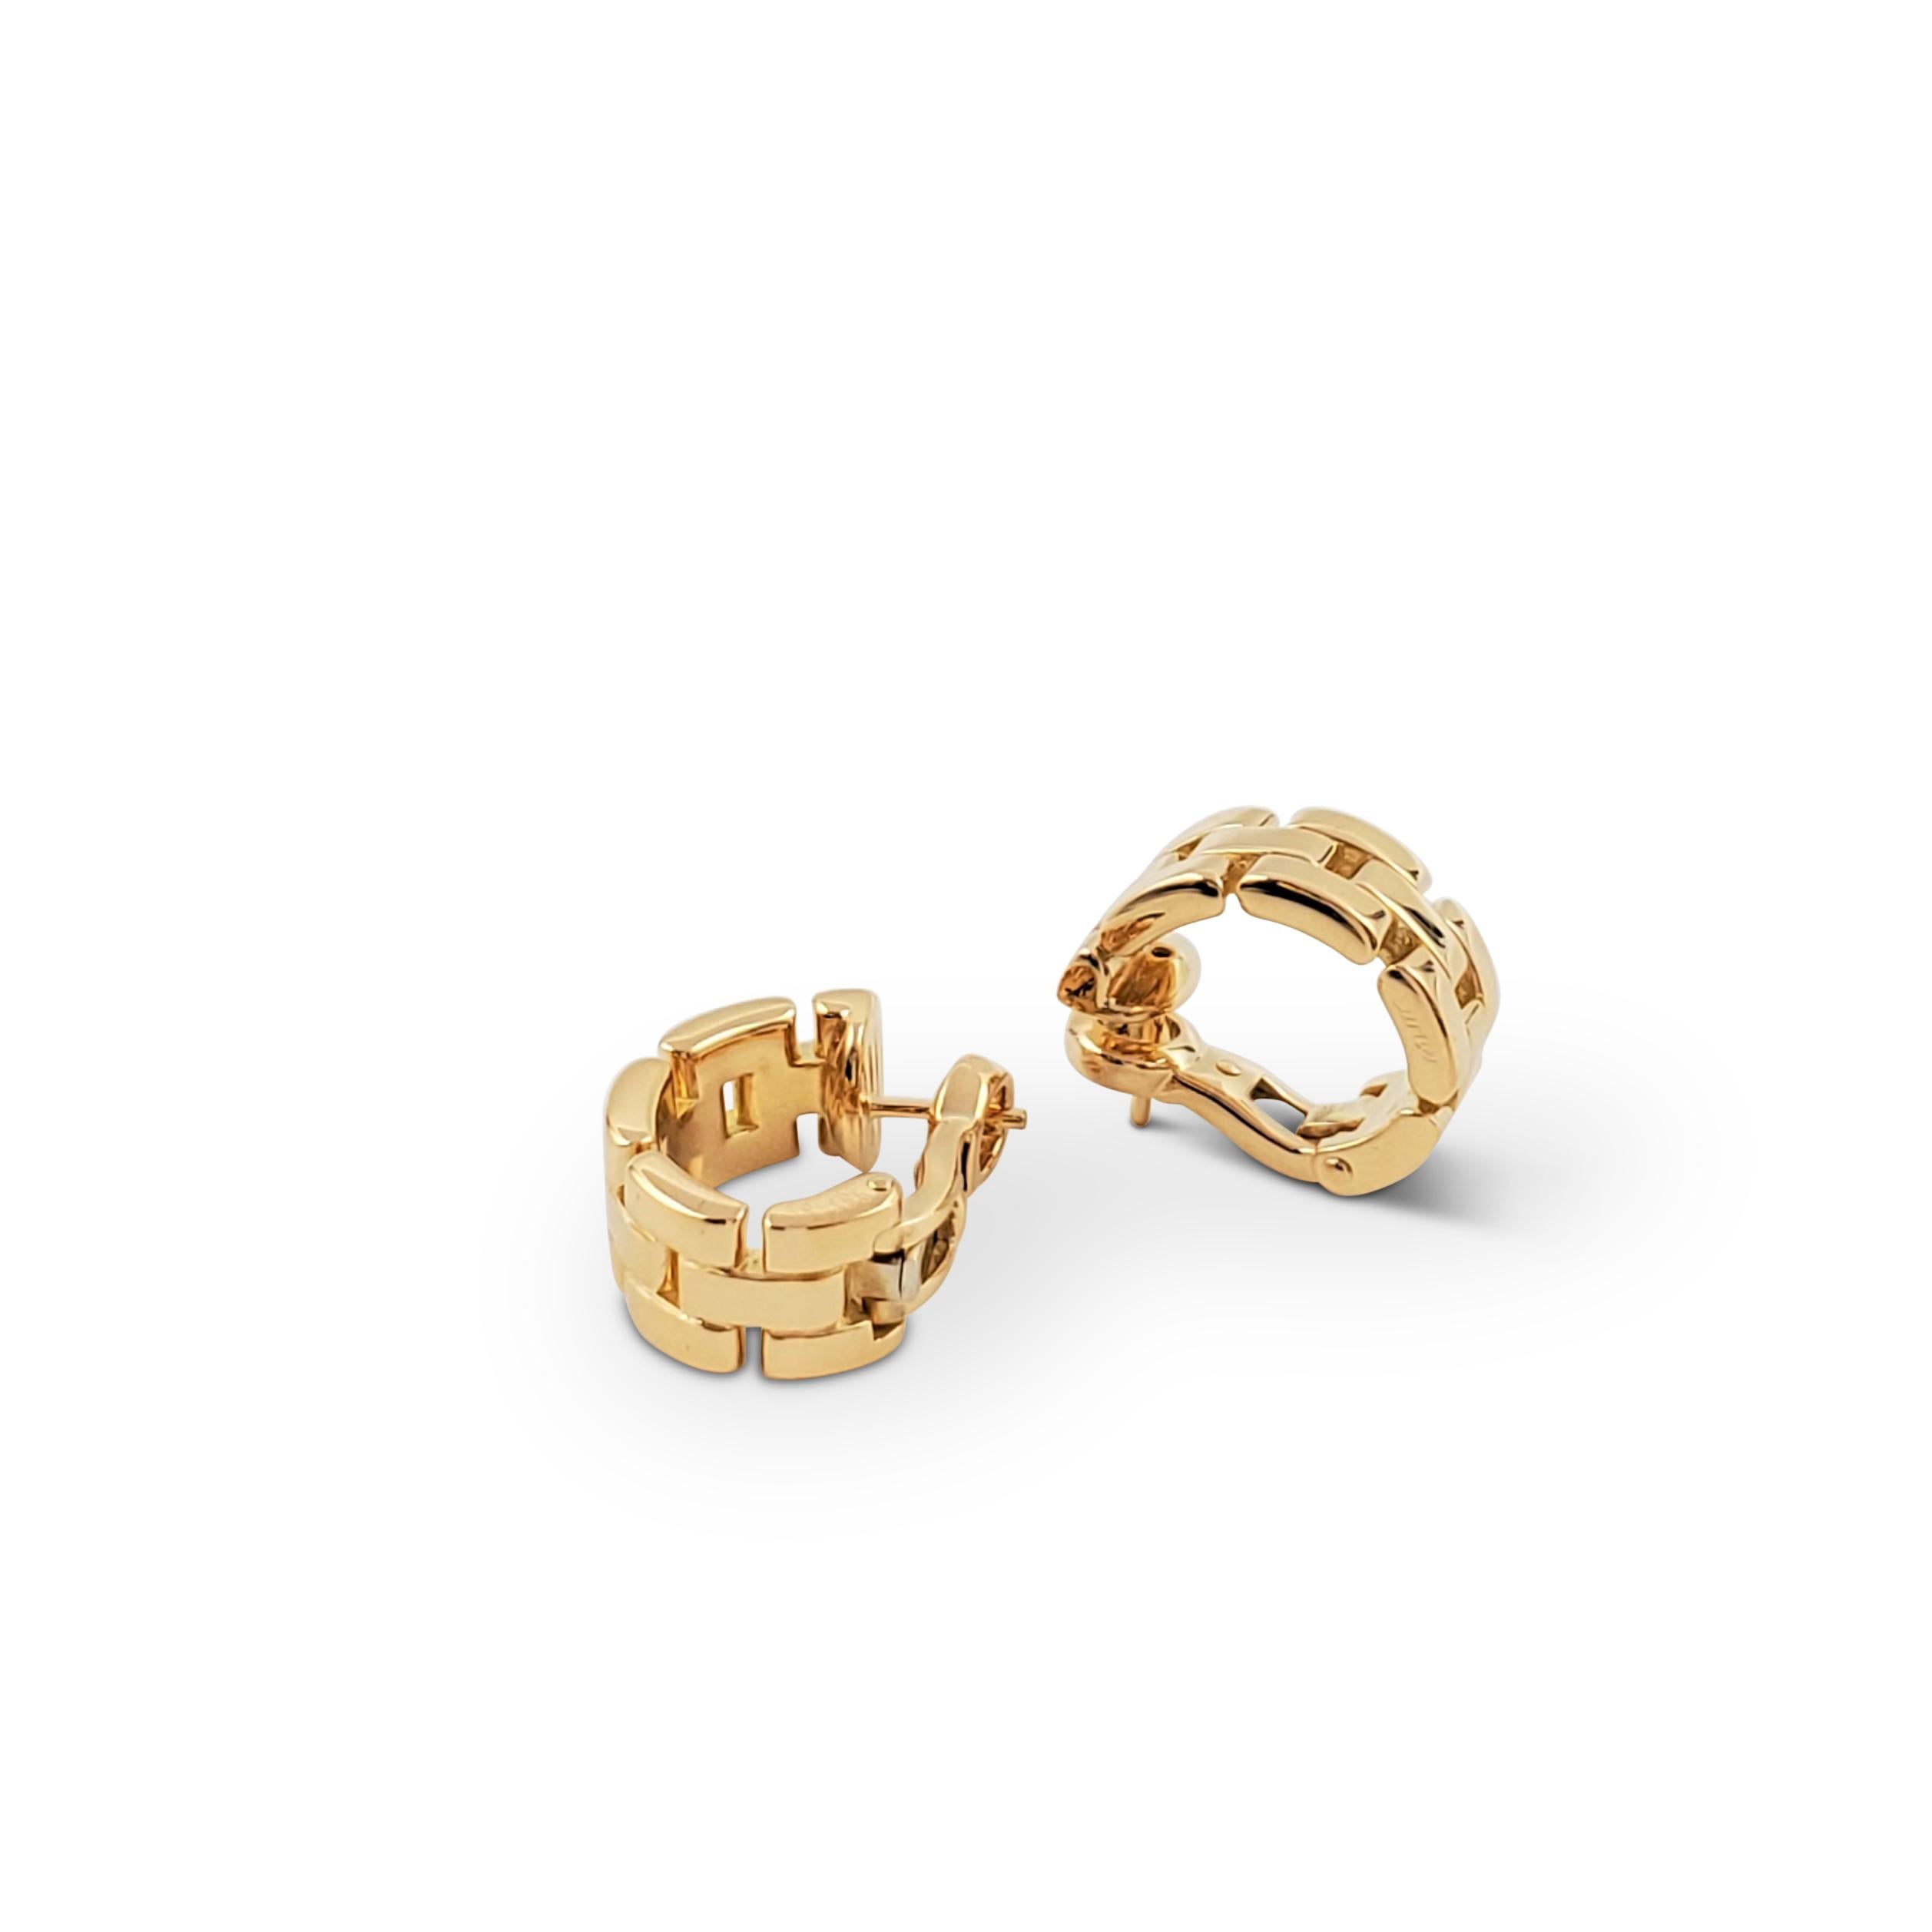 Authentic Cartier Maillon Panthere earrings crafted in 18 karat yellow are composed of five rows of iconic flat links in a half hoop design. Signed Cartier, 750, with serial number and hallmark. Presented with the original Cartier pouch, no box or